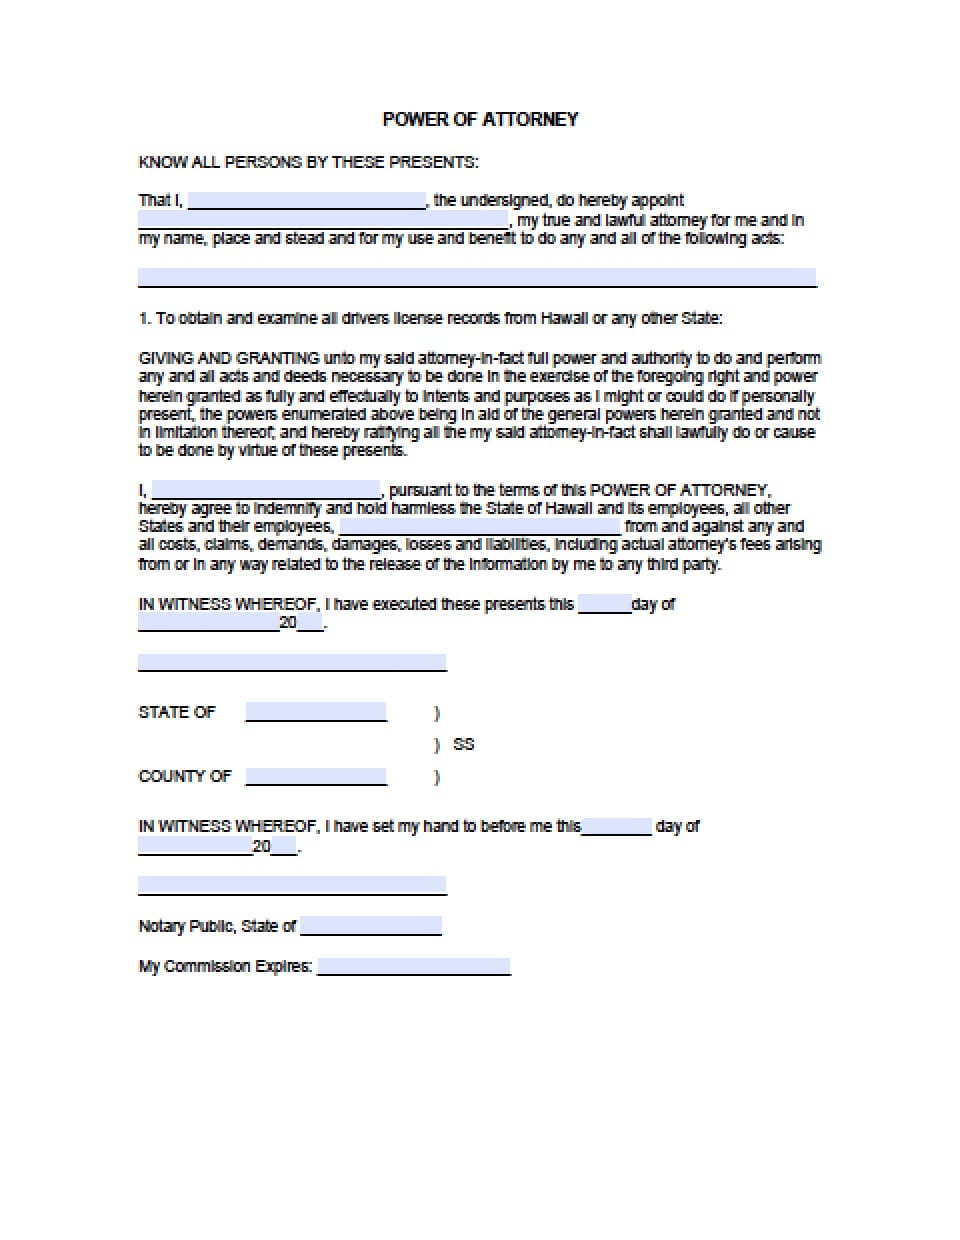 power of attorney form hawaii state
 Hawaii Vehicle Power of Attorney Form - Power of Attorney ...